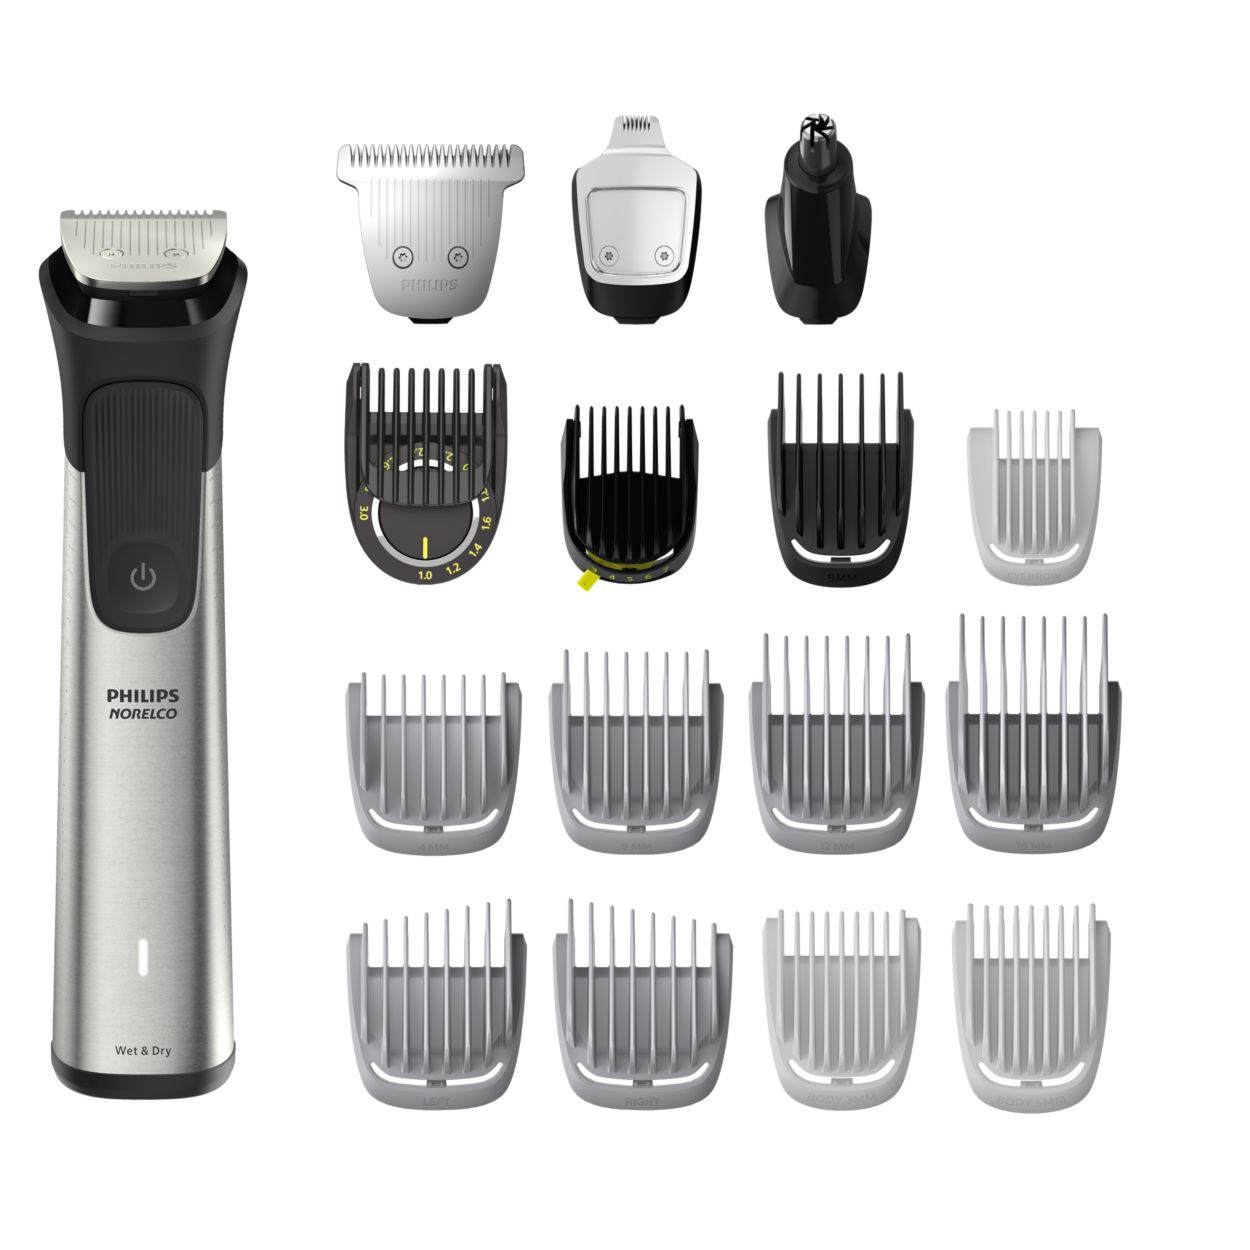 All-in-One Trimmer Series 7000 MG7910/49